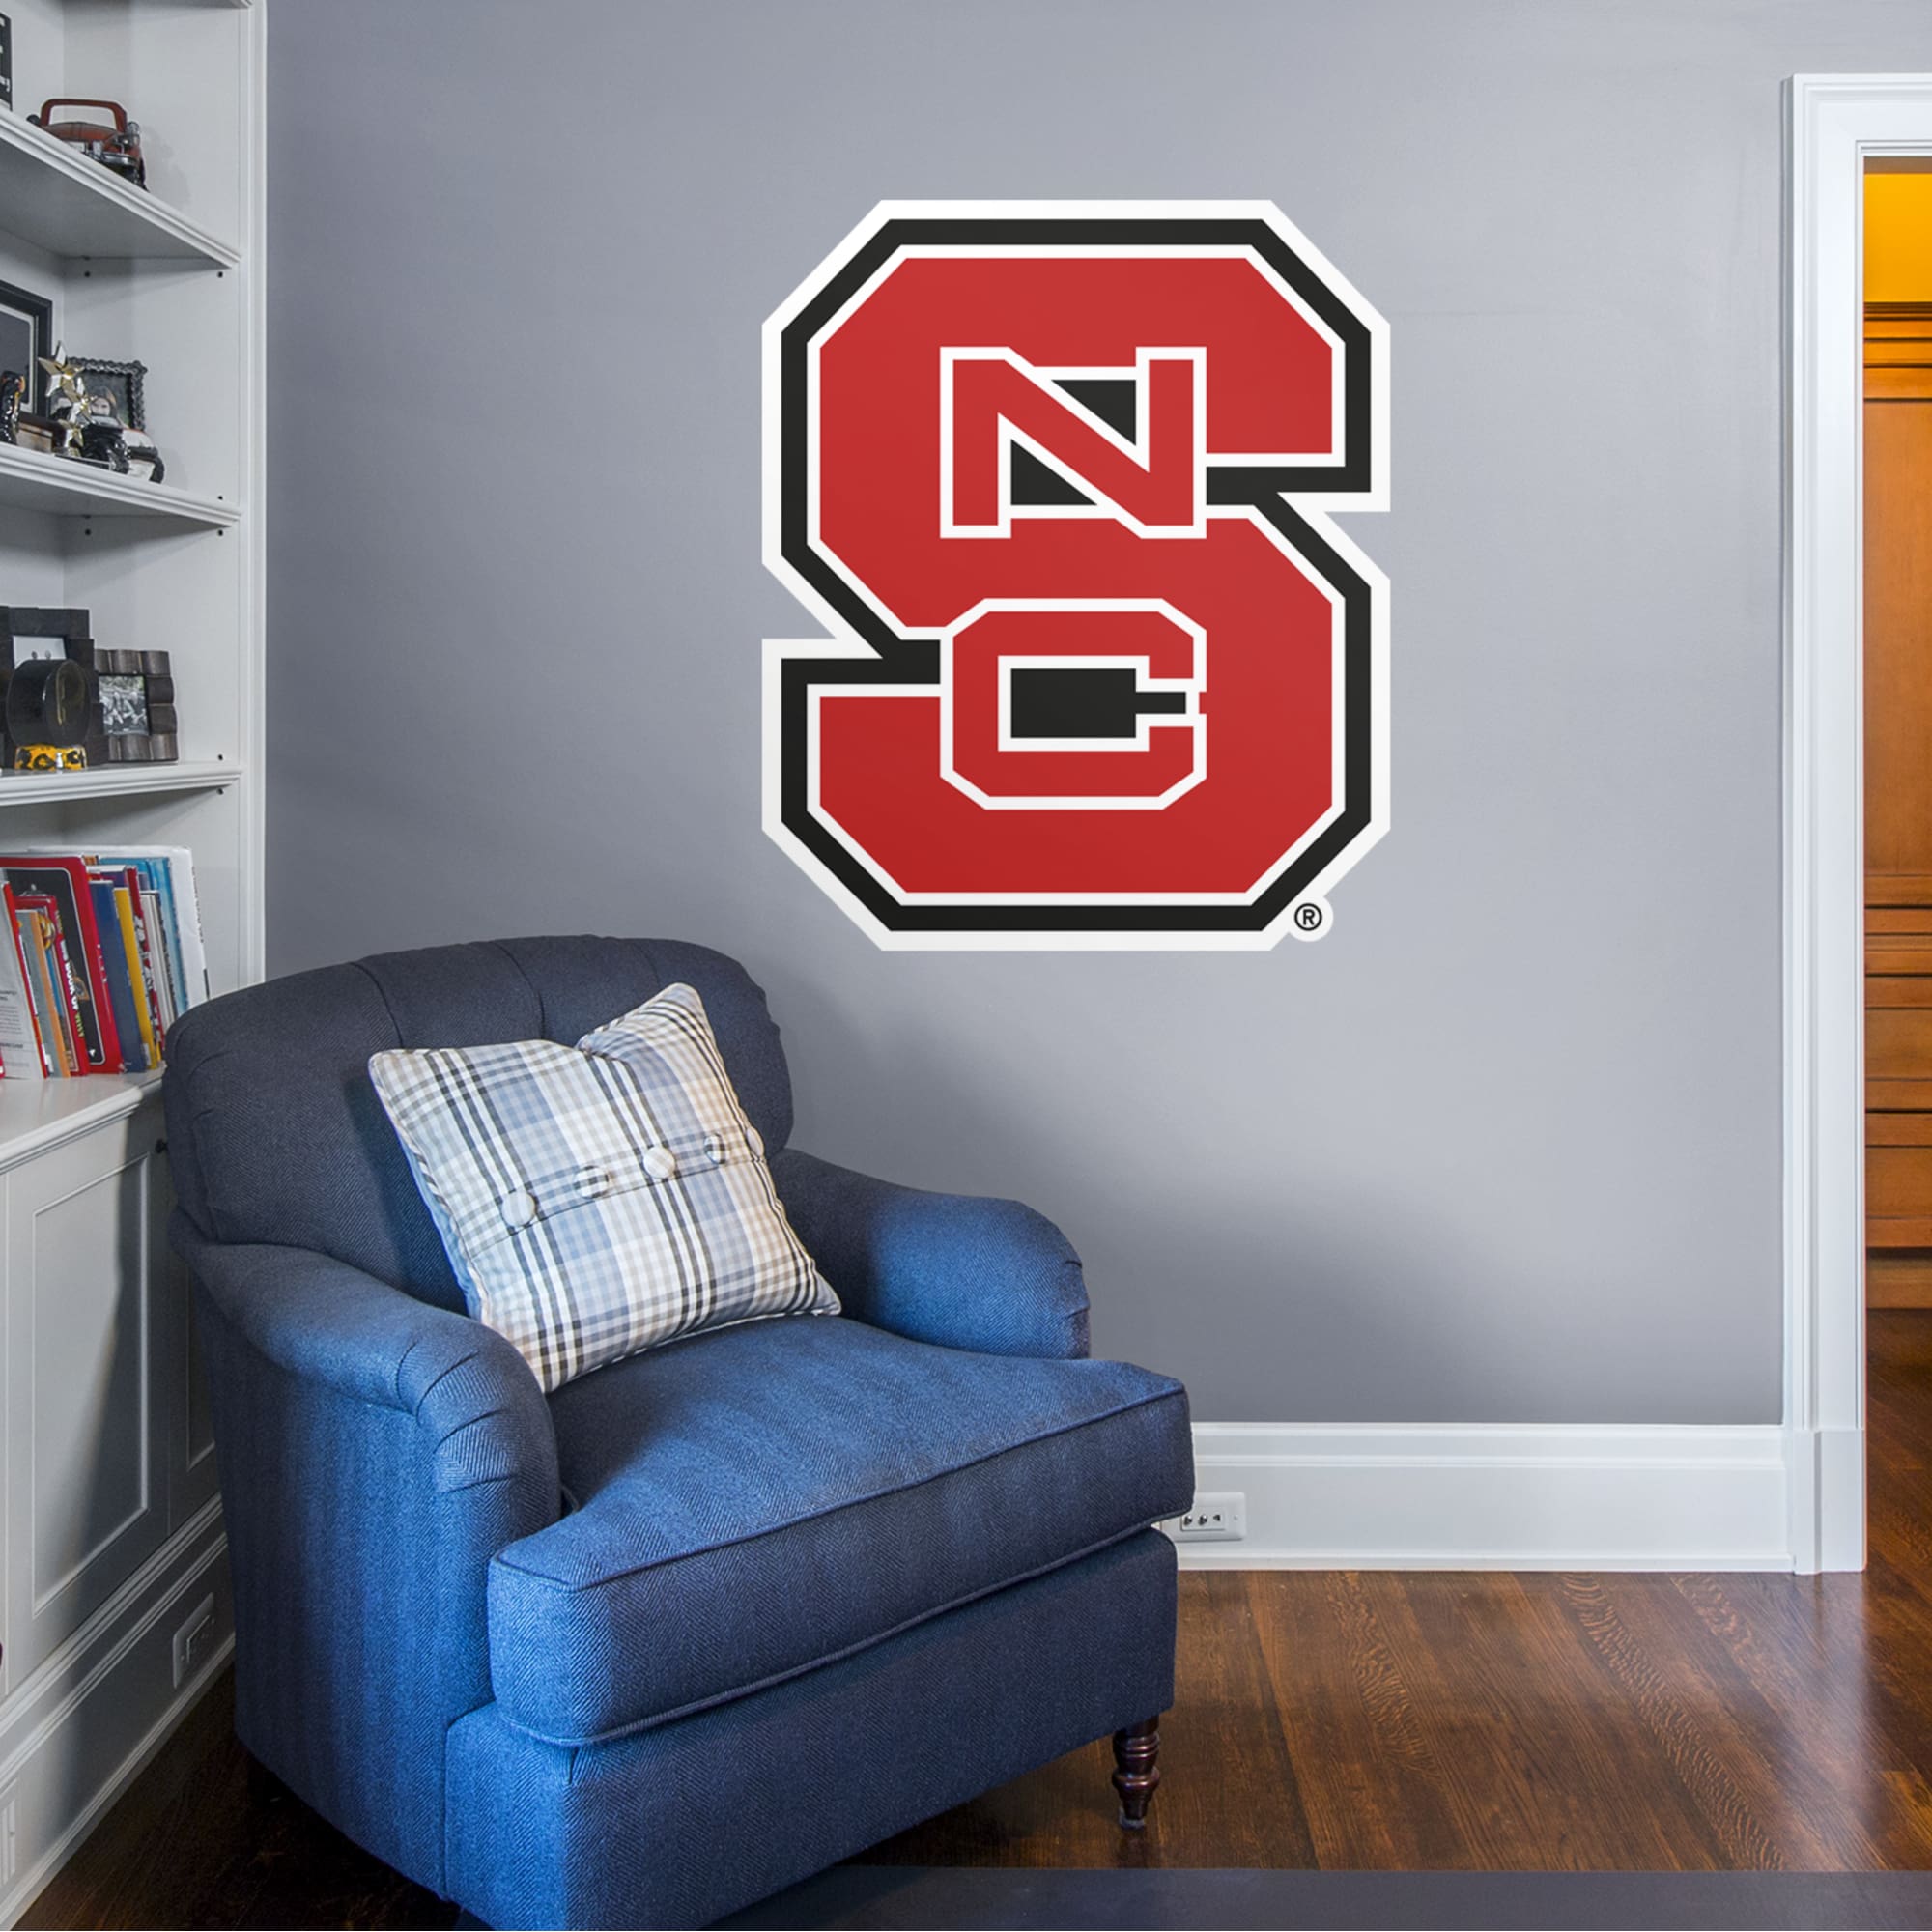 North Carolina State Wolfpack for NC State Wolfpack: Logo - Officially Licensed Removable Wall Decal 38.0"W x 45.0"H by Fathead